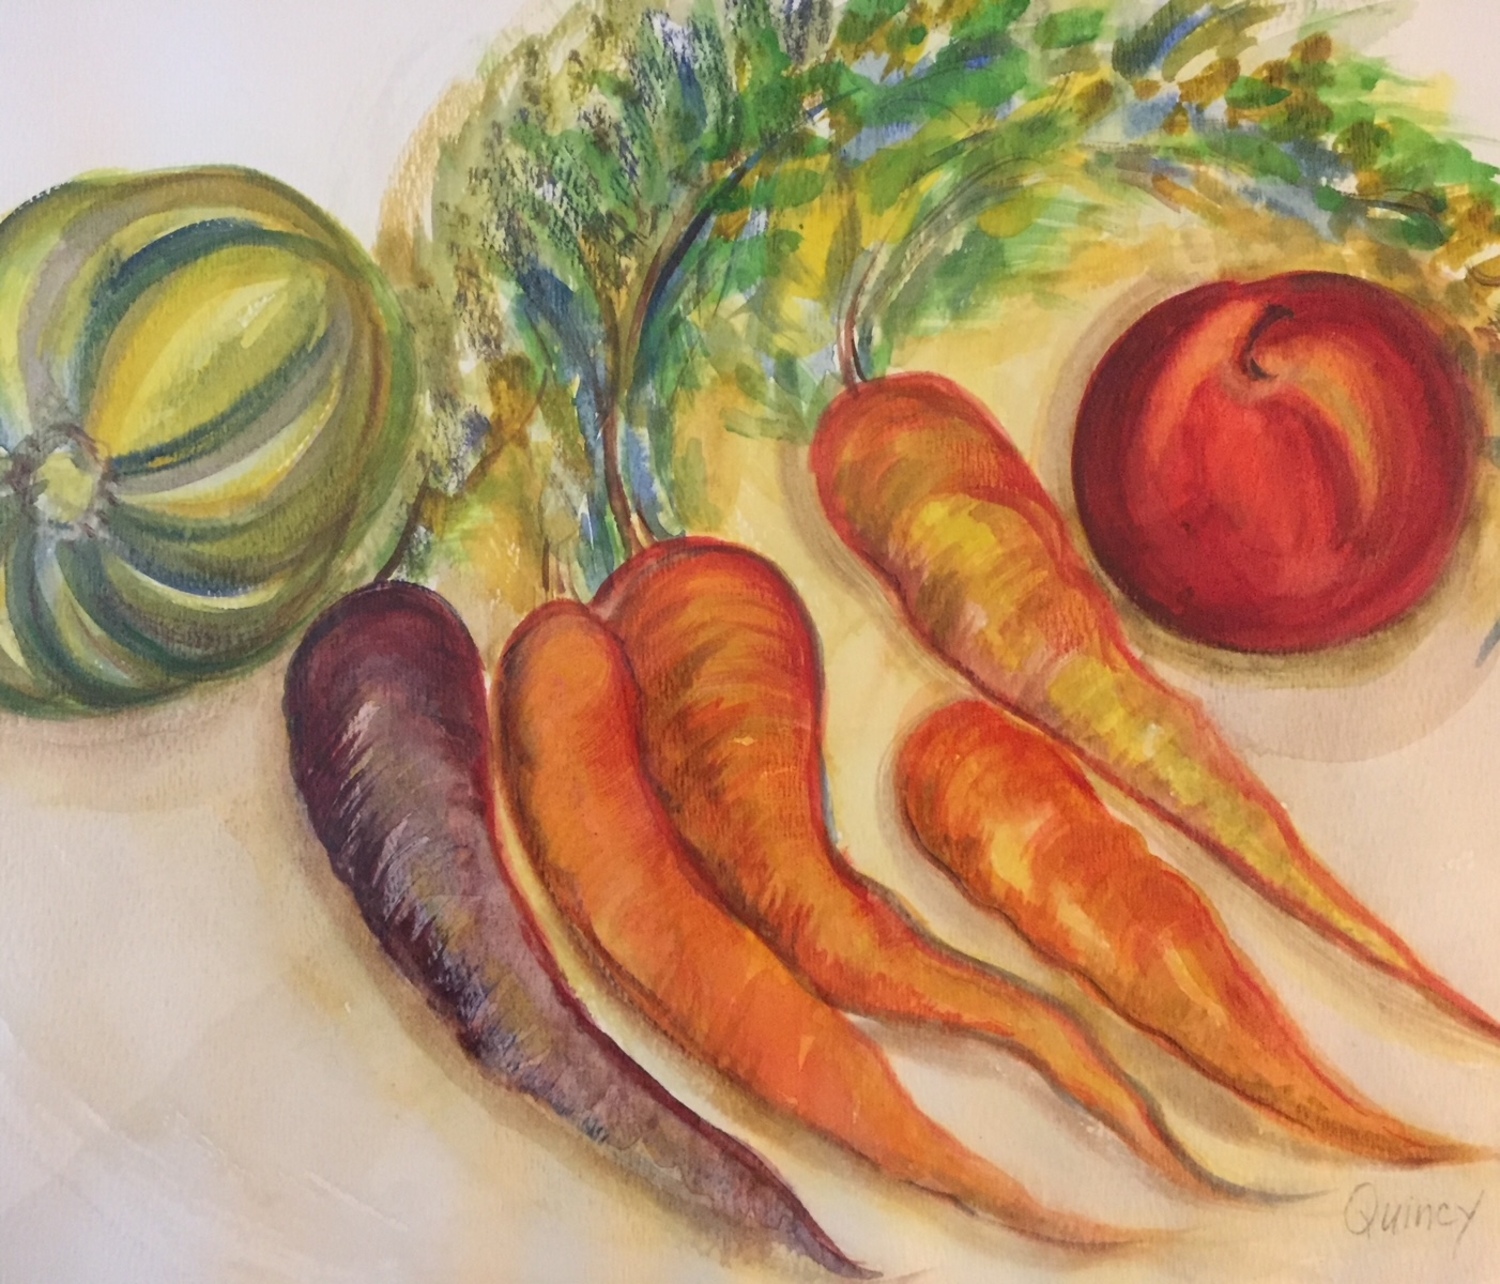 Watercolorist Quincy Egginton is displaying local landscapes and still lifes of local produce now through June at the Milk Pail Fresh Market in Water Mill. QUINCY EGGINTON